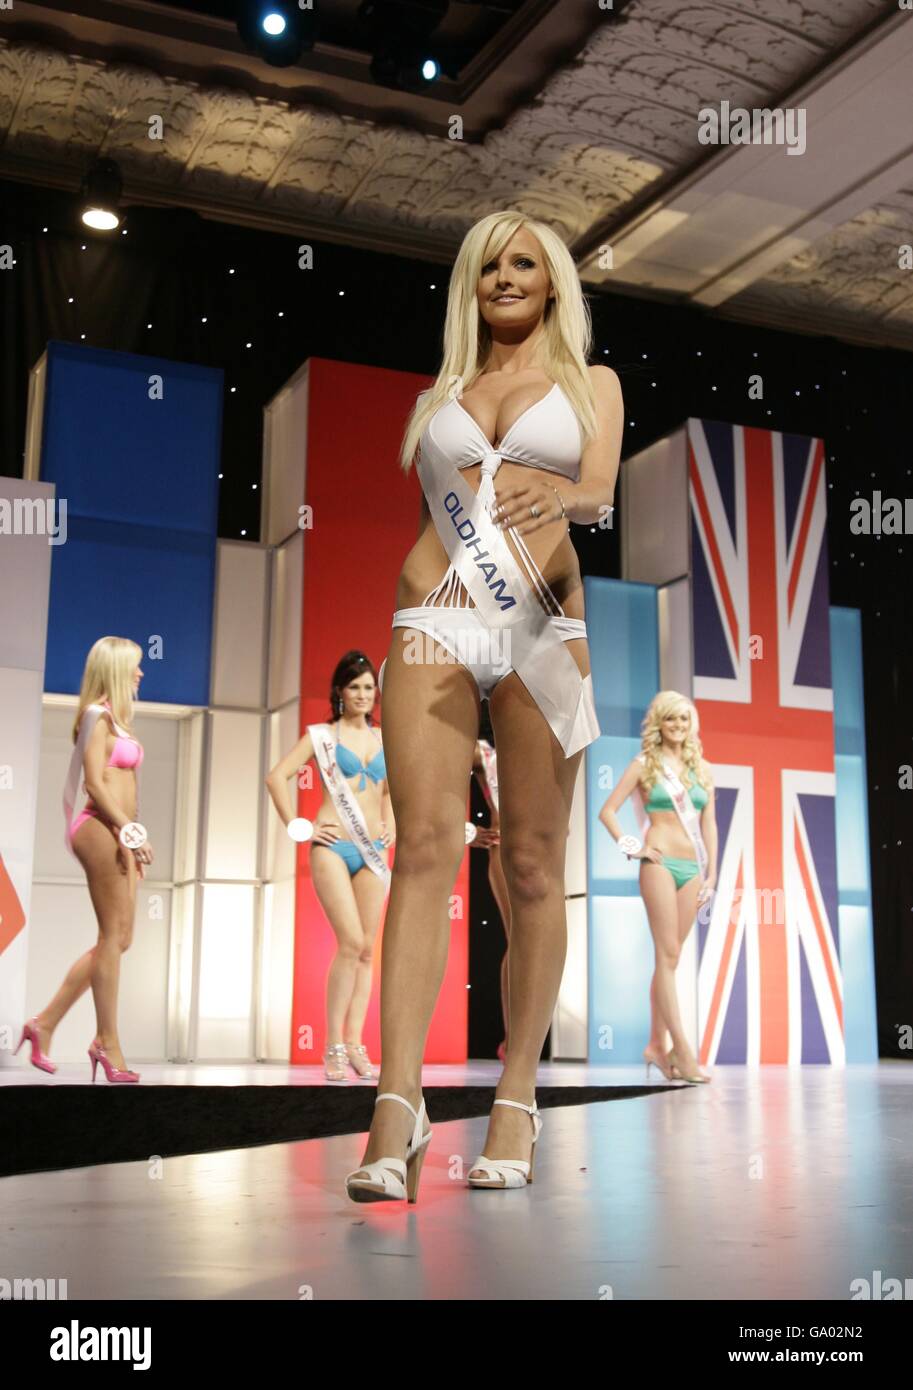 Michelle Marsh, Miss Oldham, one of the contestants during the Grand Final of Miss Great Britain held at Grosvenor House hotel in central London. Stock Photo